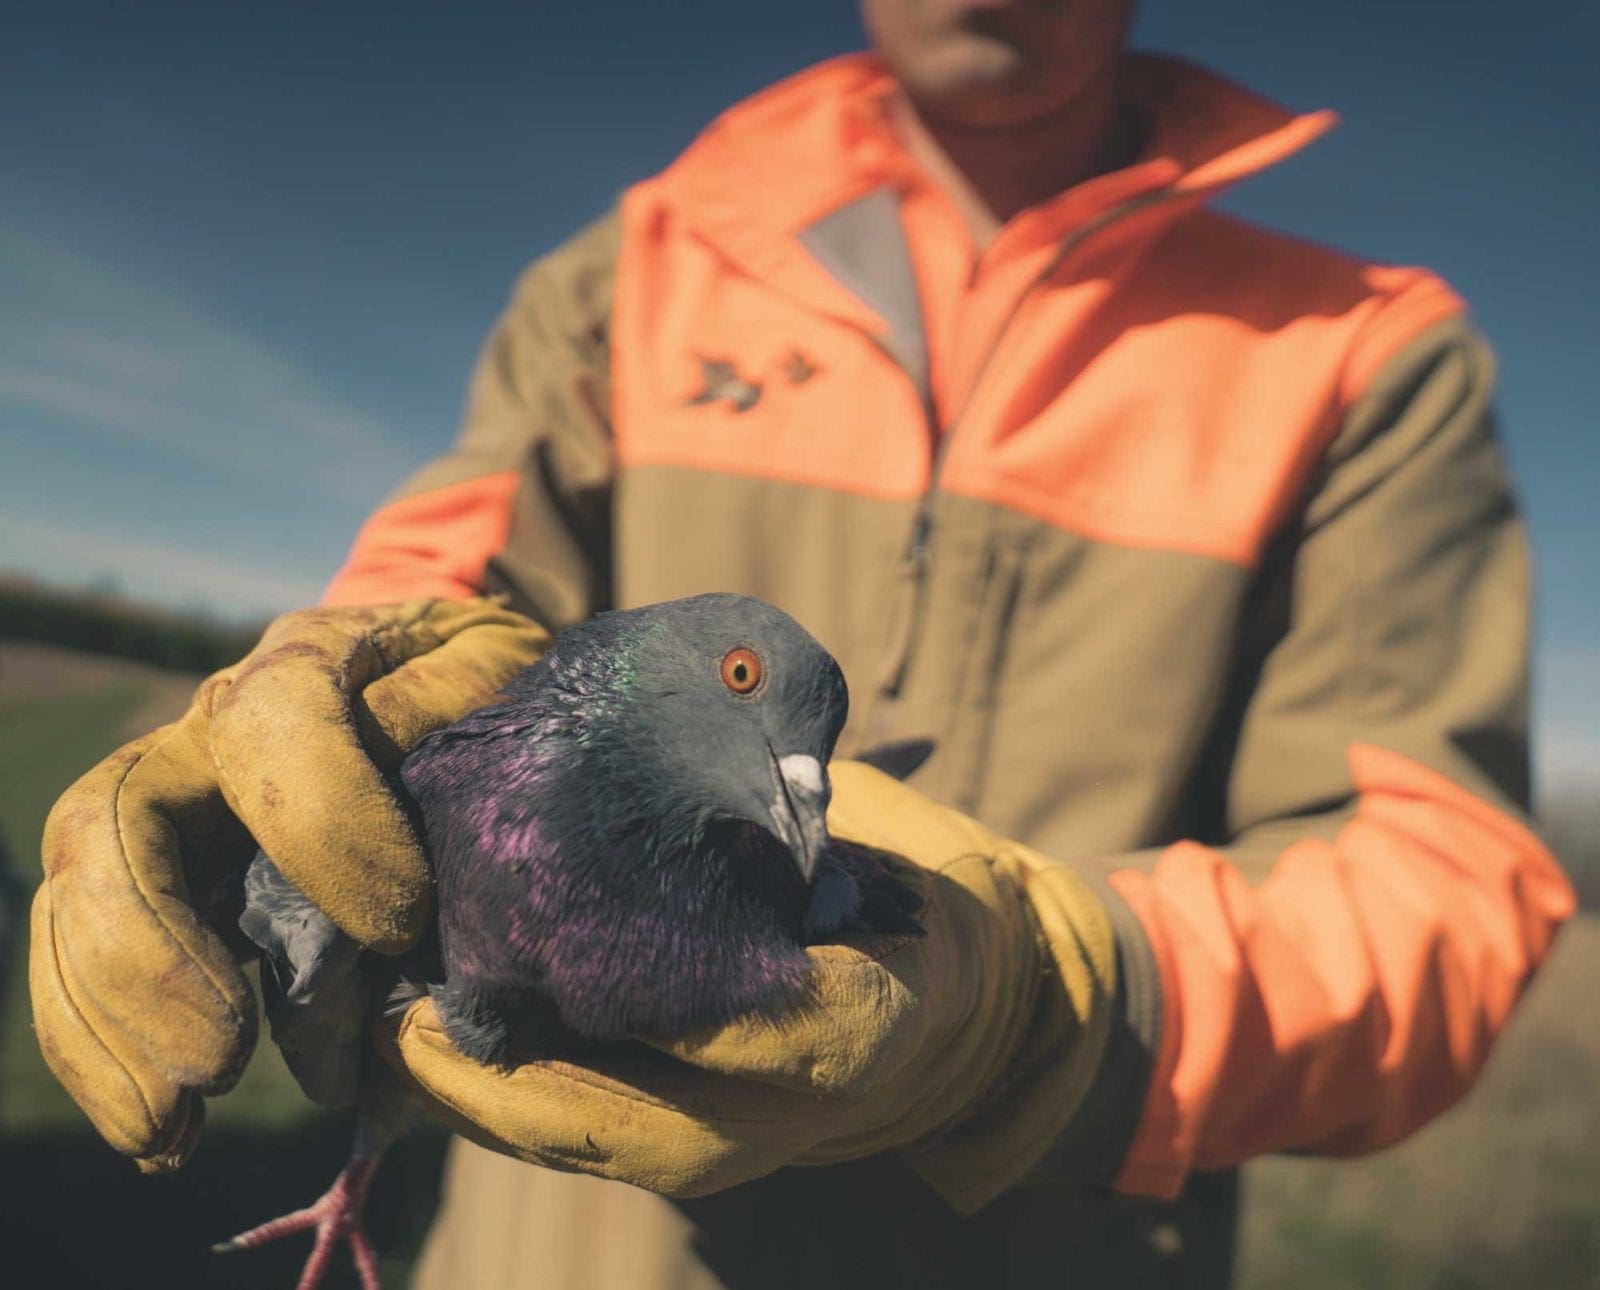 A bird dog trainer holding a training pigeon.